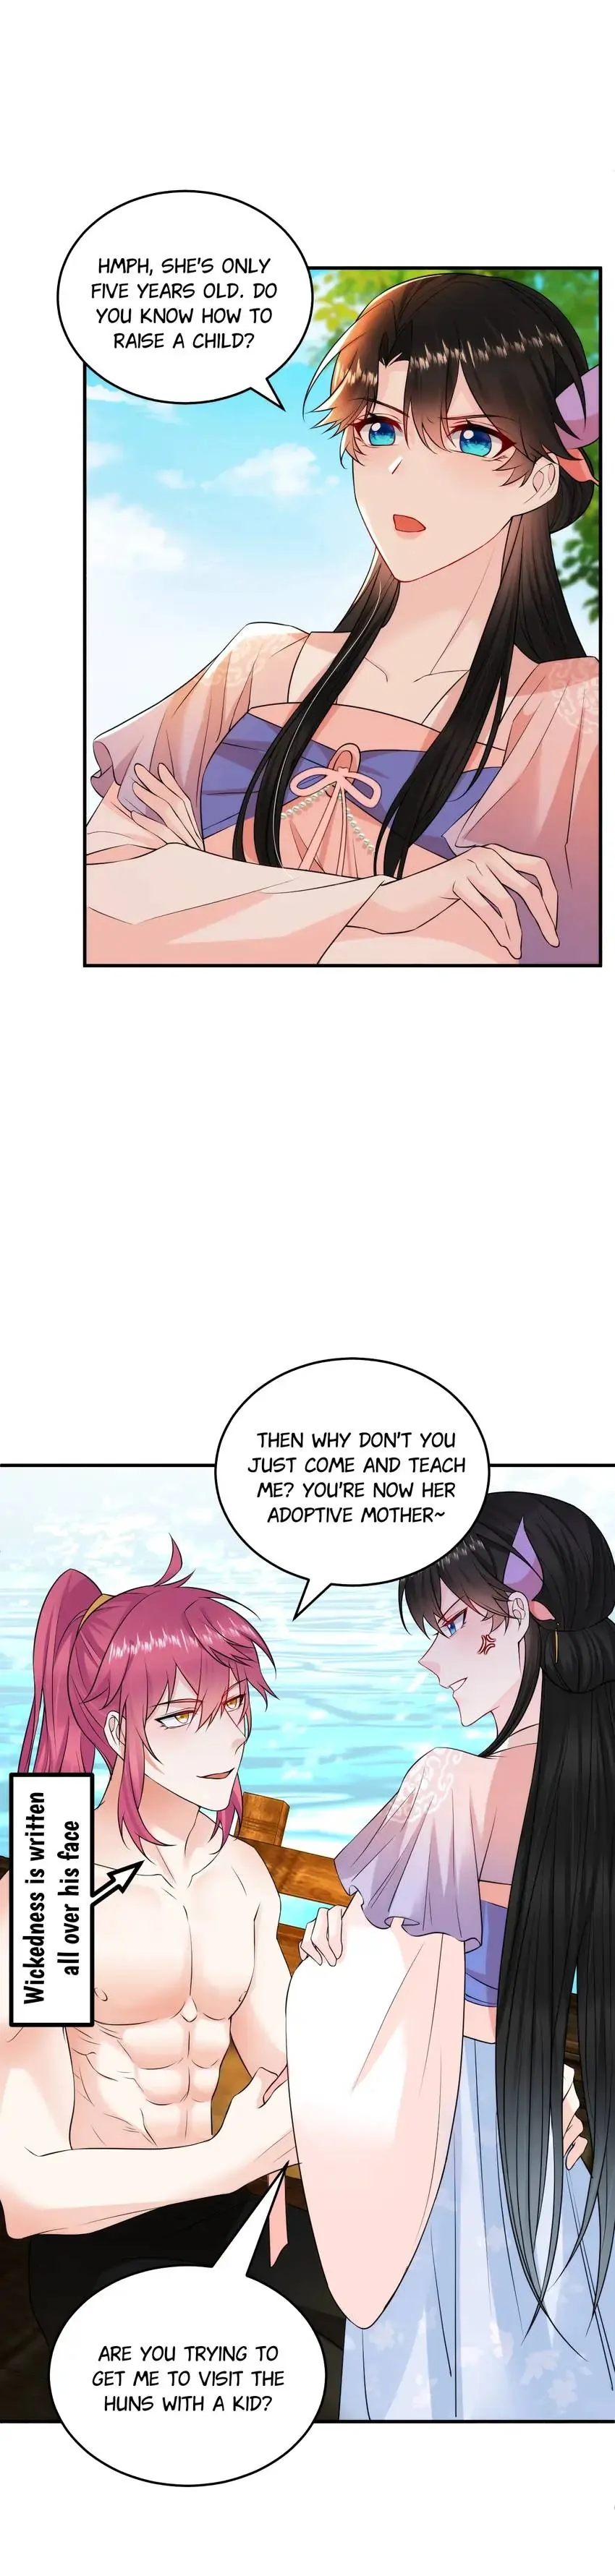 Miss Lover Tamer - Page 2